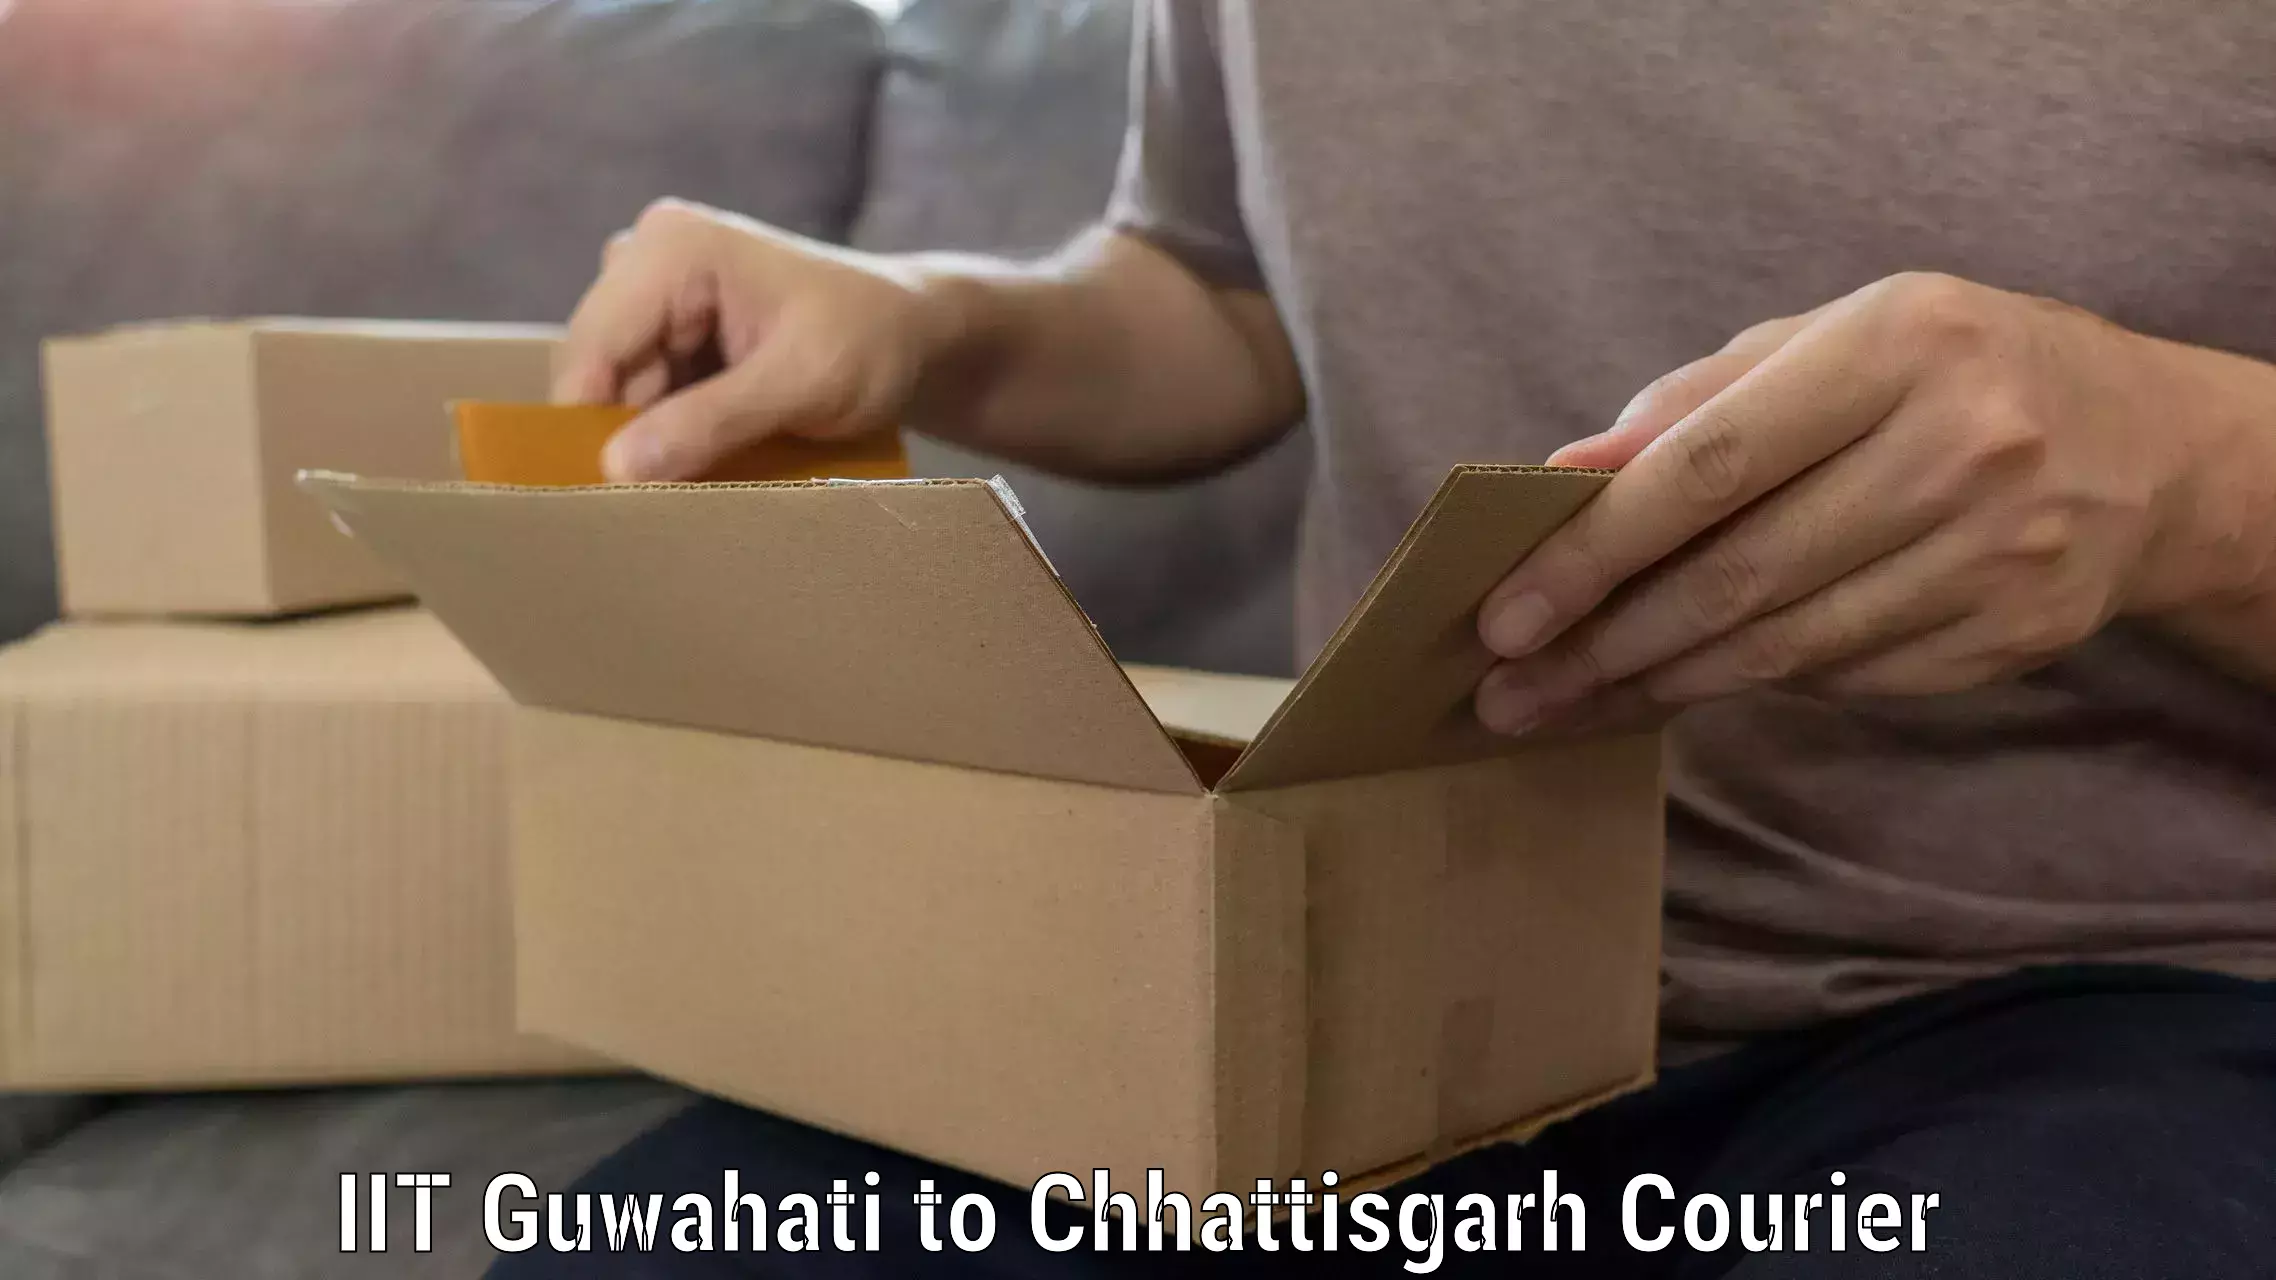 Furniture delivery service in IIT Guwahati to Surguja